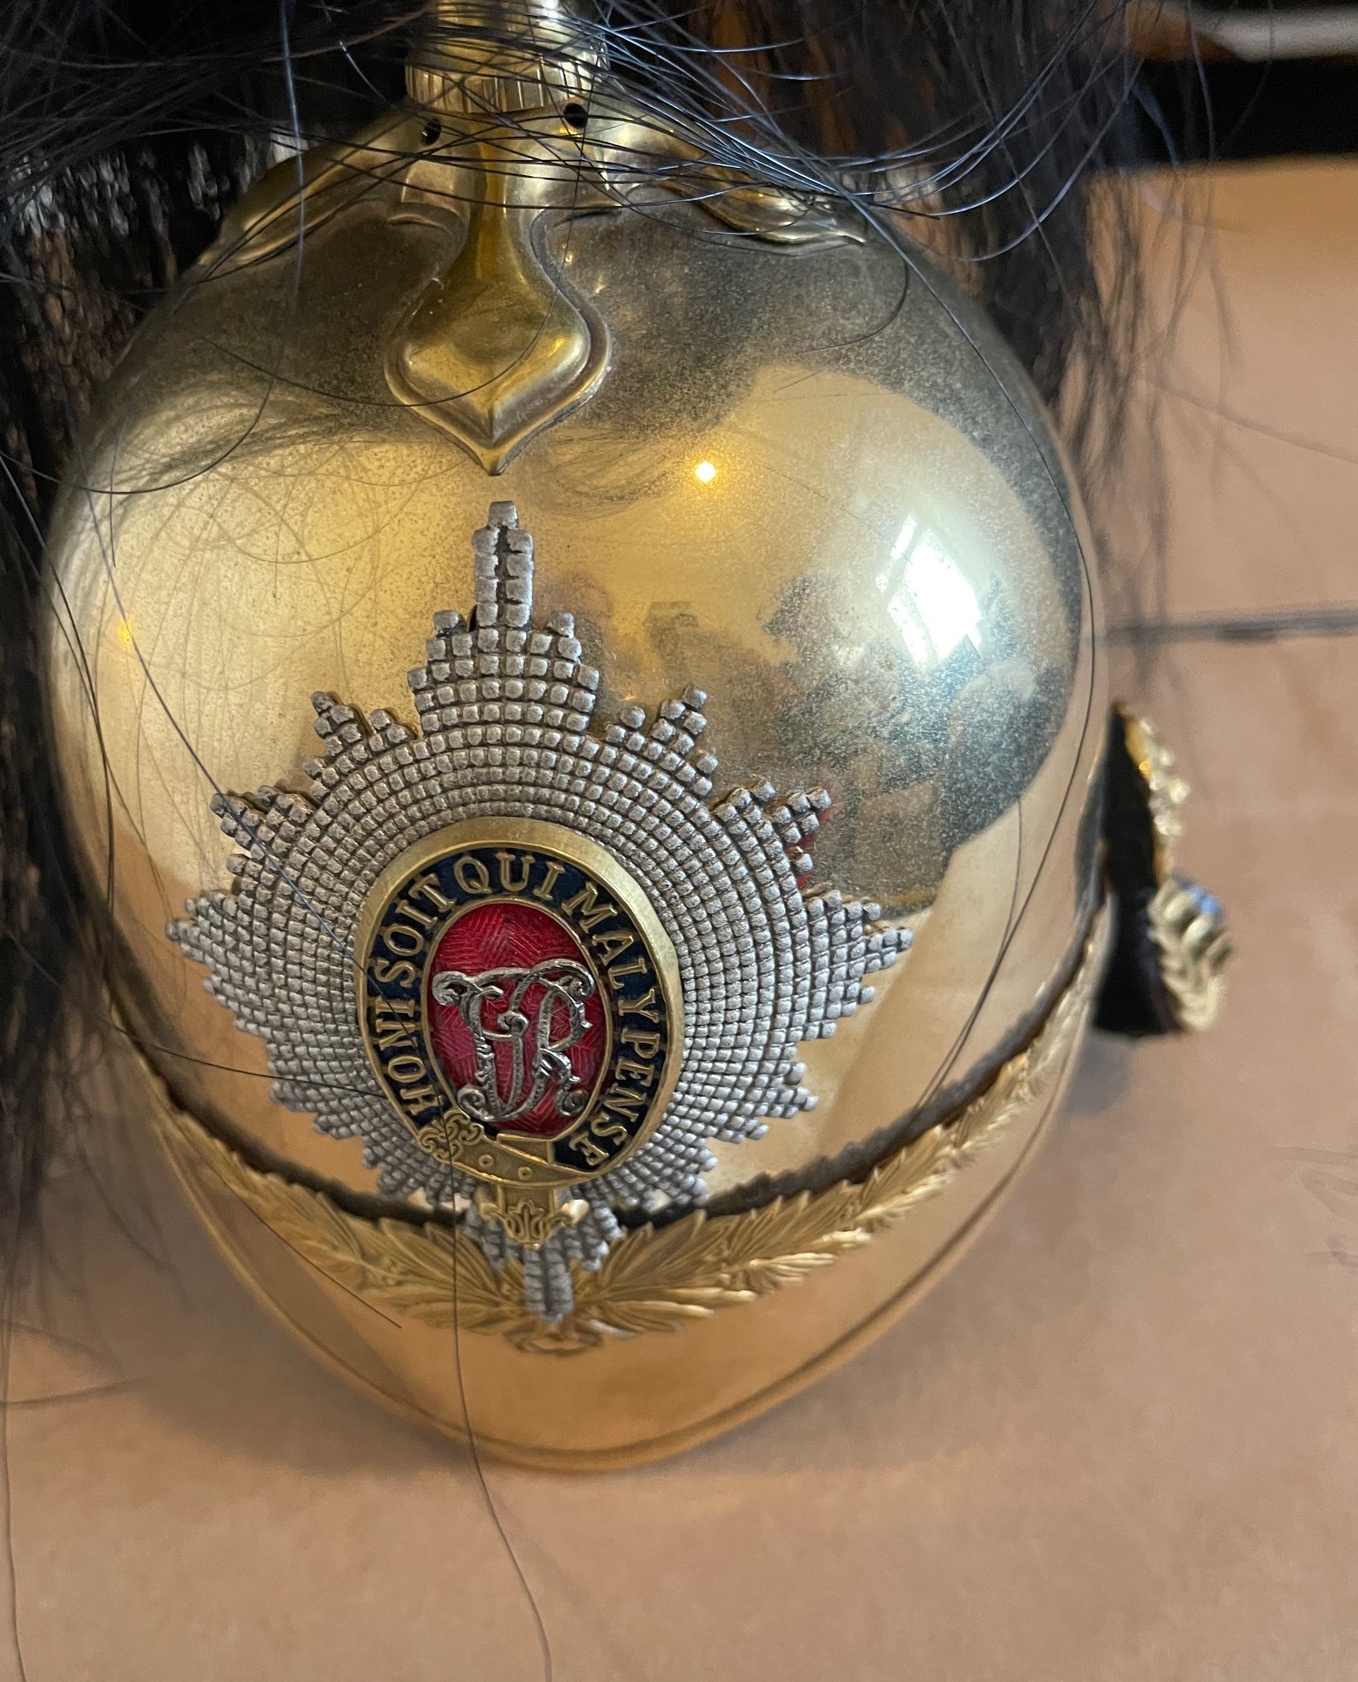 Royal Dragoons Officers Military Helmet - Desk Ornament? - 11" tall and 6 1/2" at widest. - Image 2 of 6